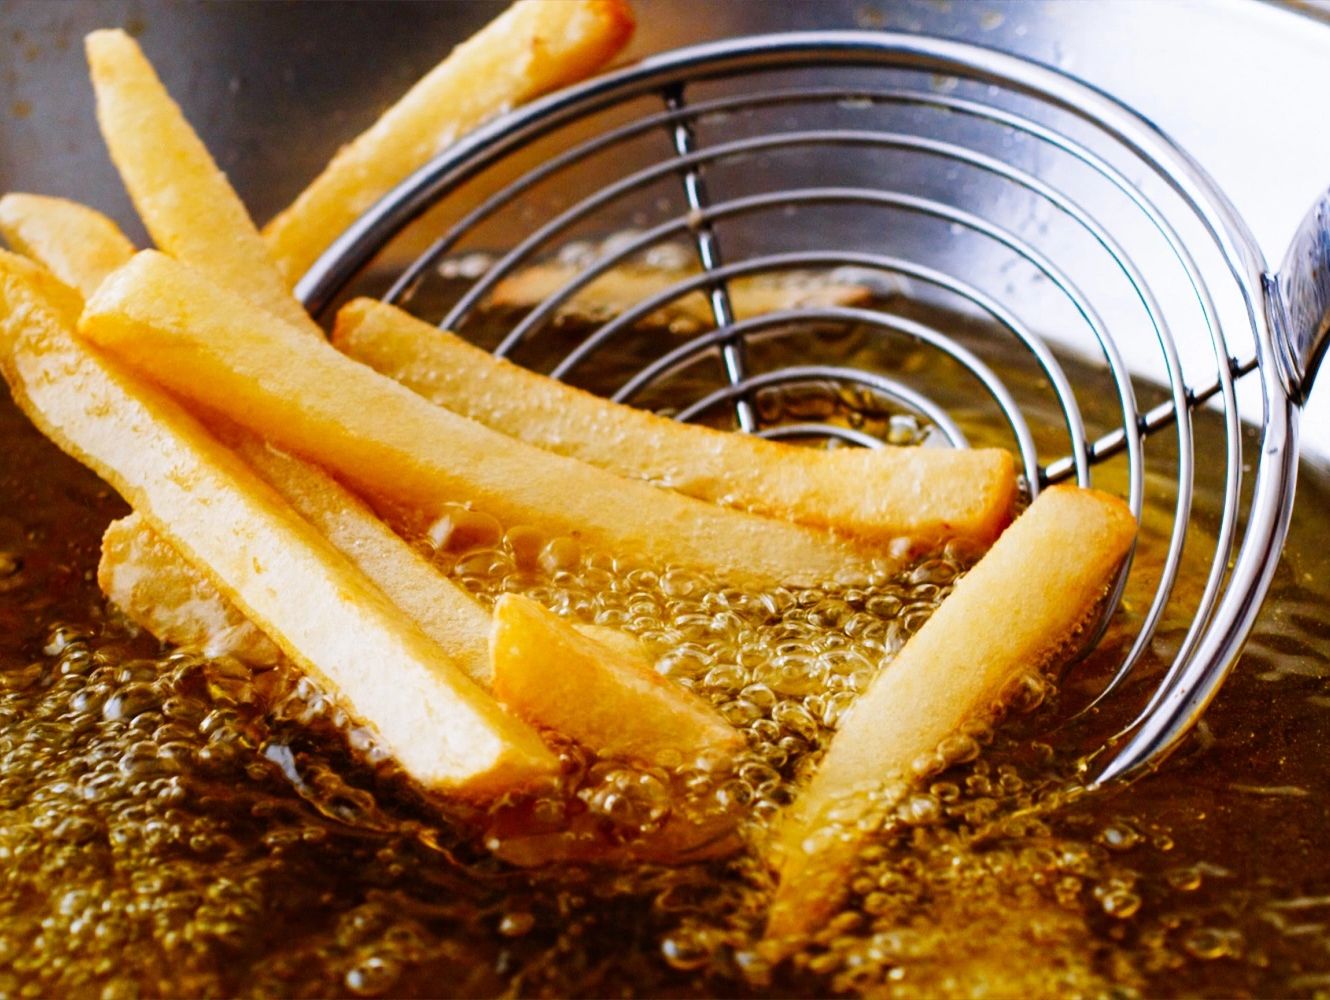 French fries being taken out of a deep fryer